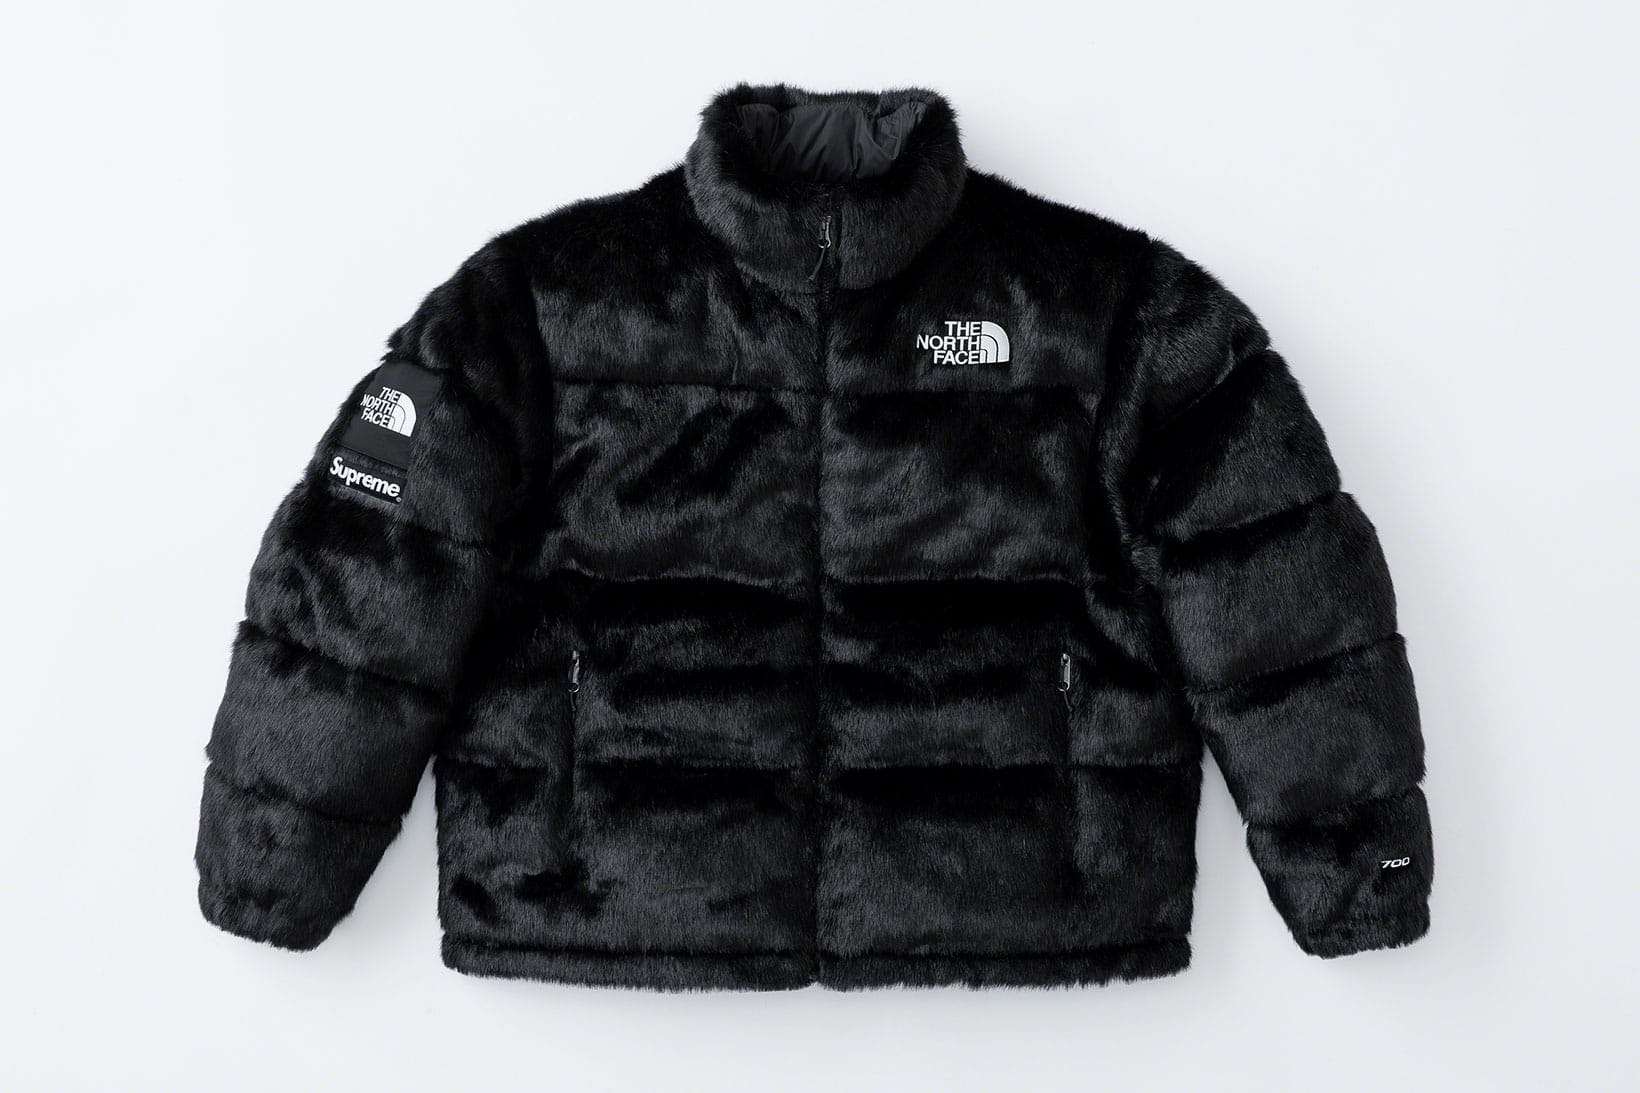 north face jacket with fur lining